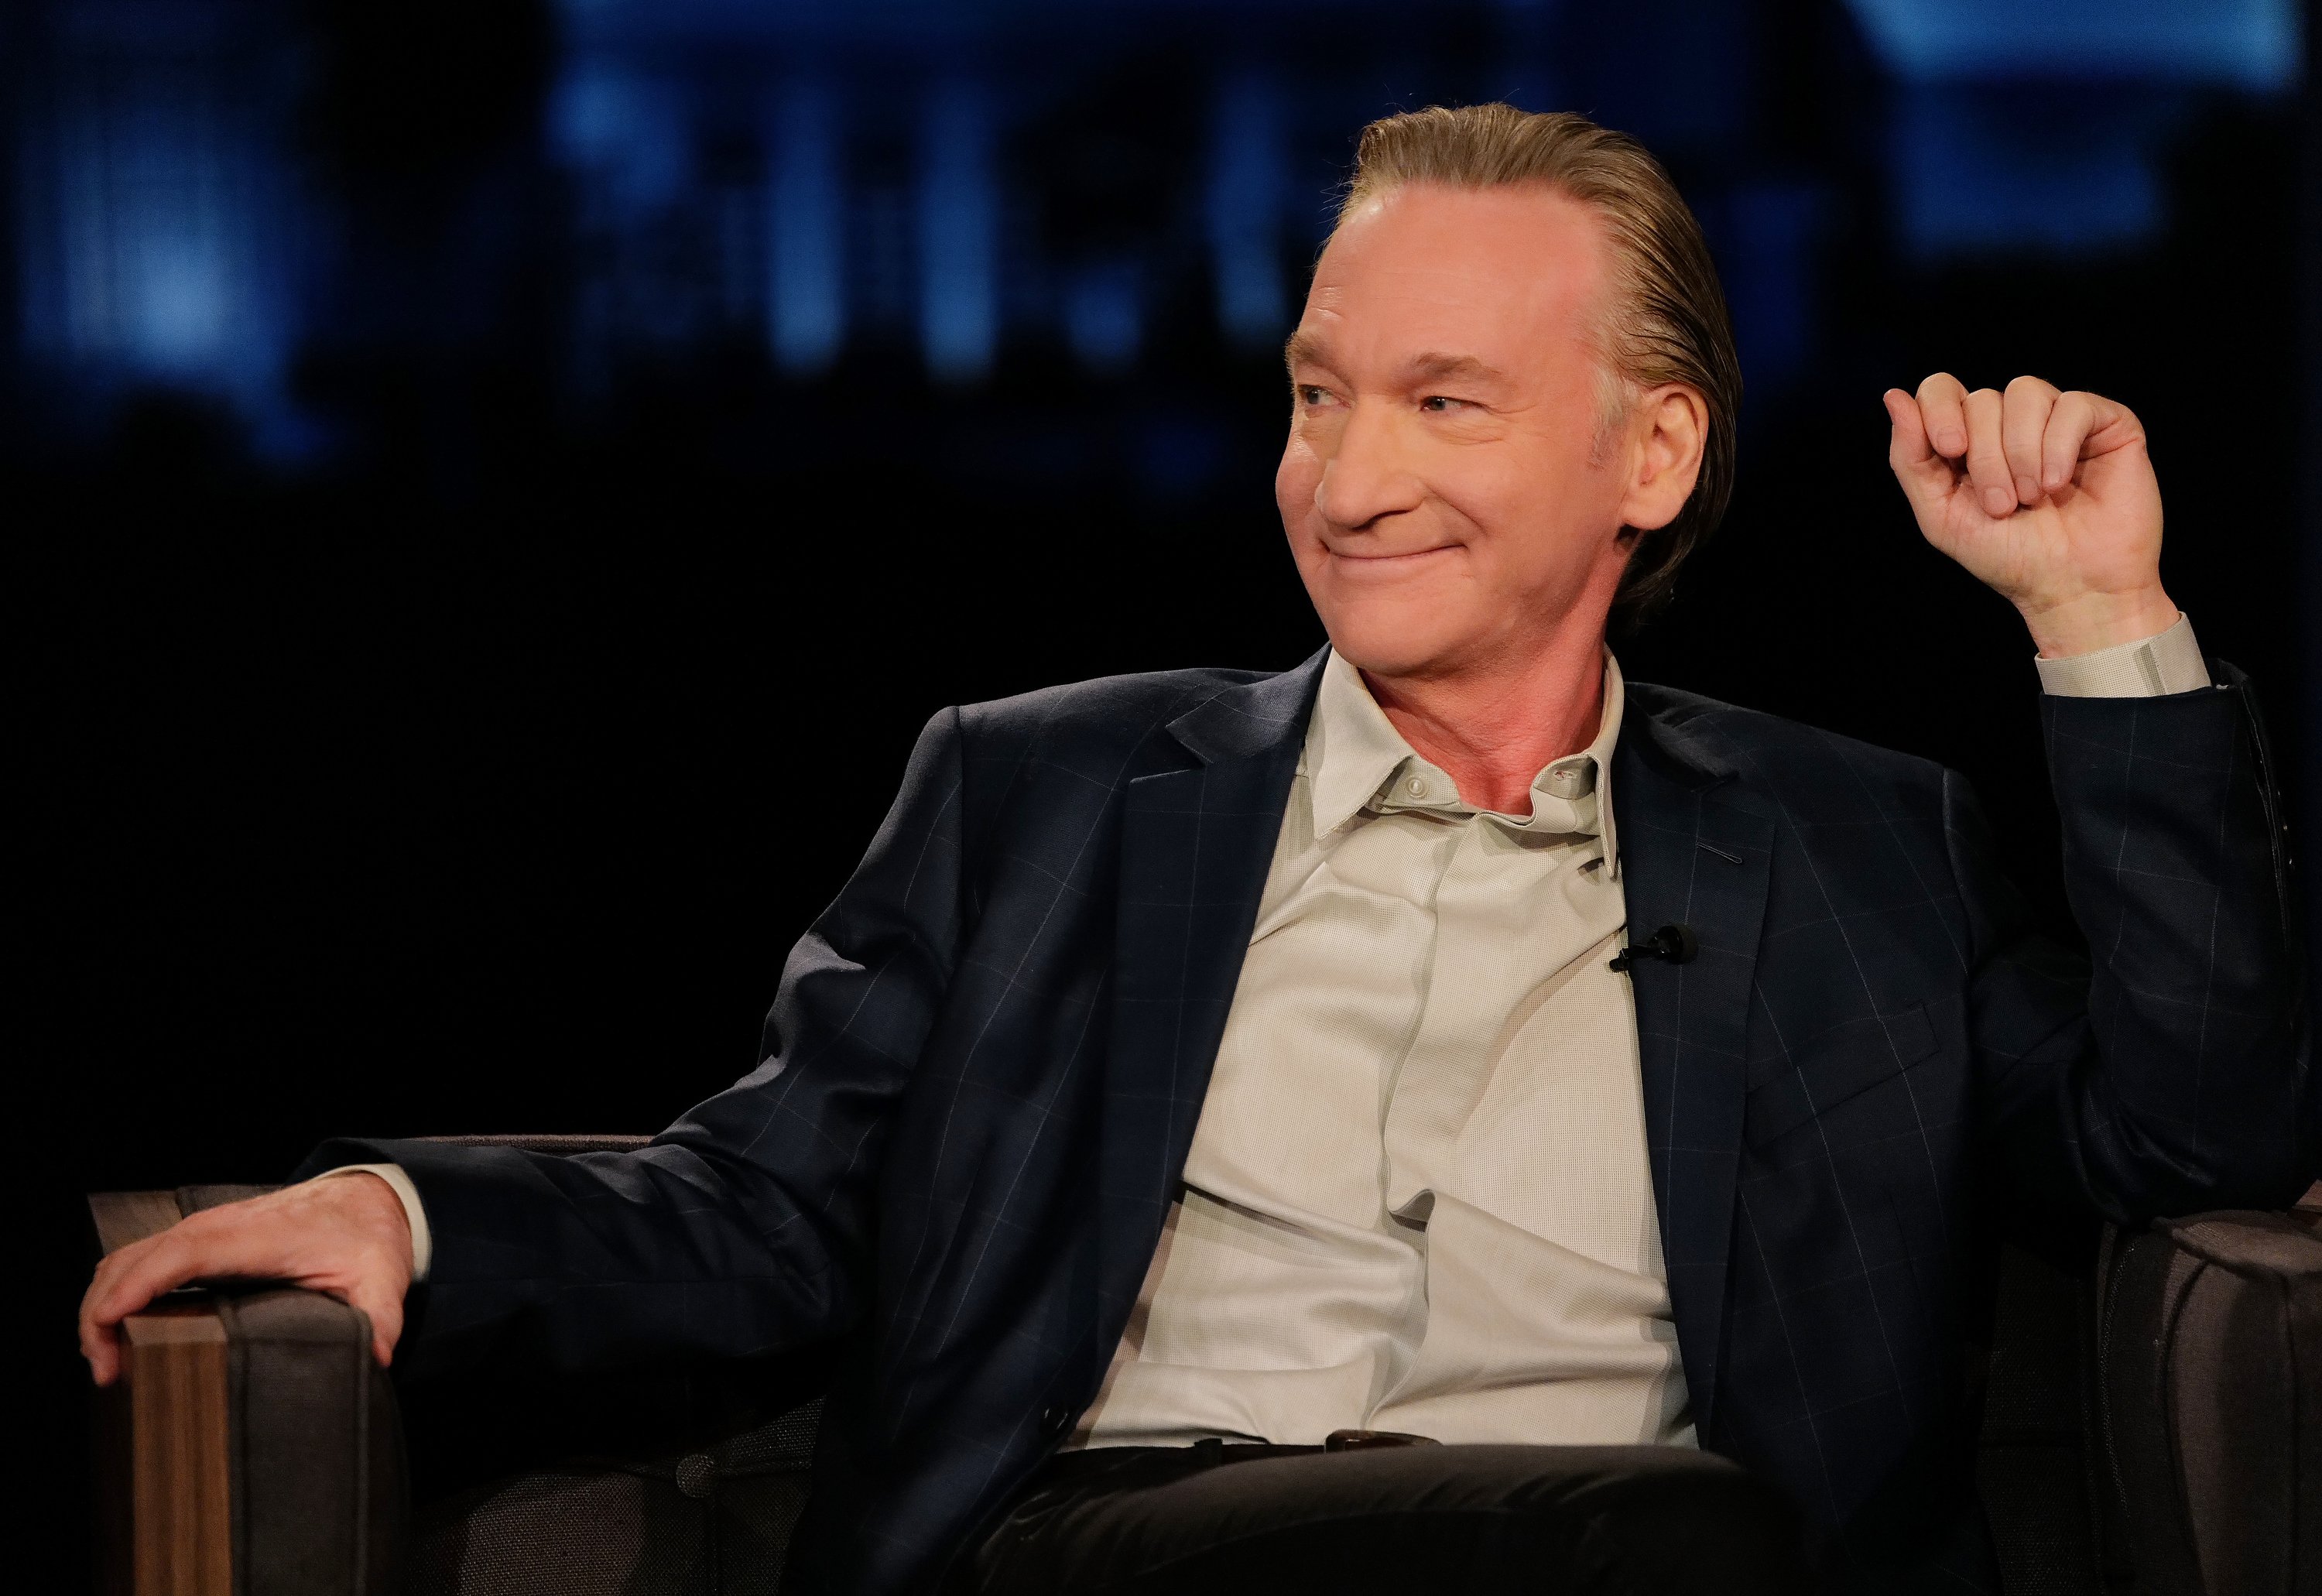 Bill Maher on "Jimmy Kimmel Live!" on October 26, 2020 | Source: Getty Images